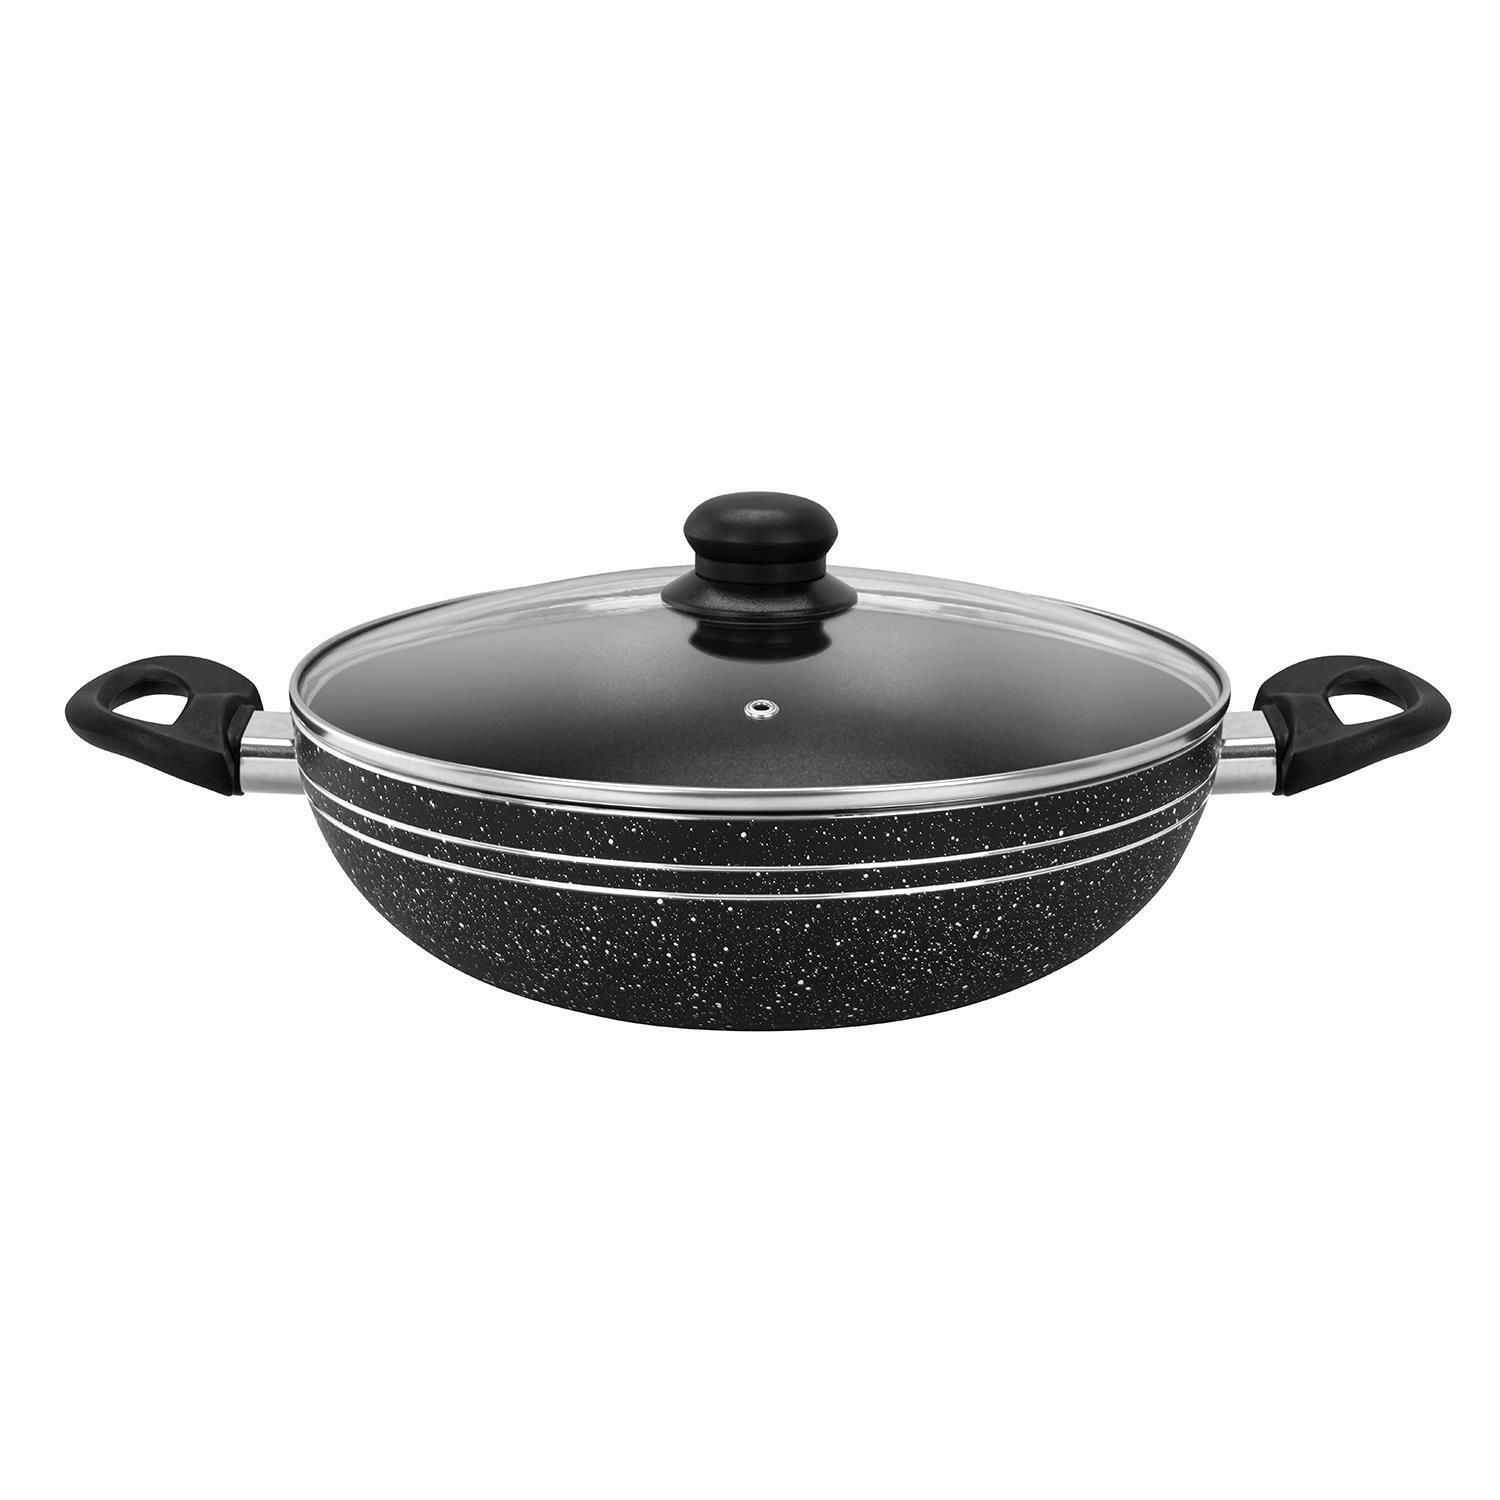 32cm Non-Stick Induction Wok Pan with Glass Lid